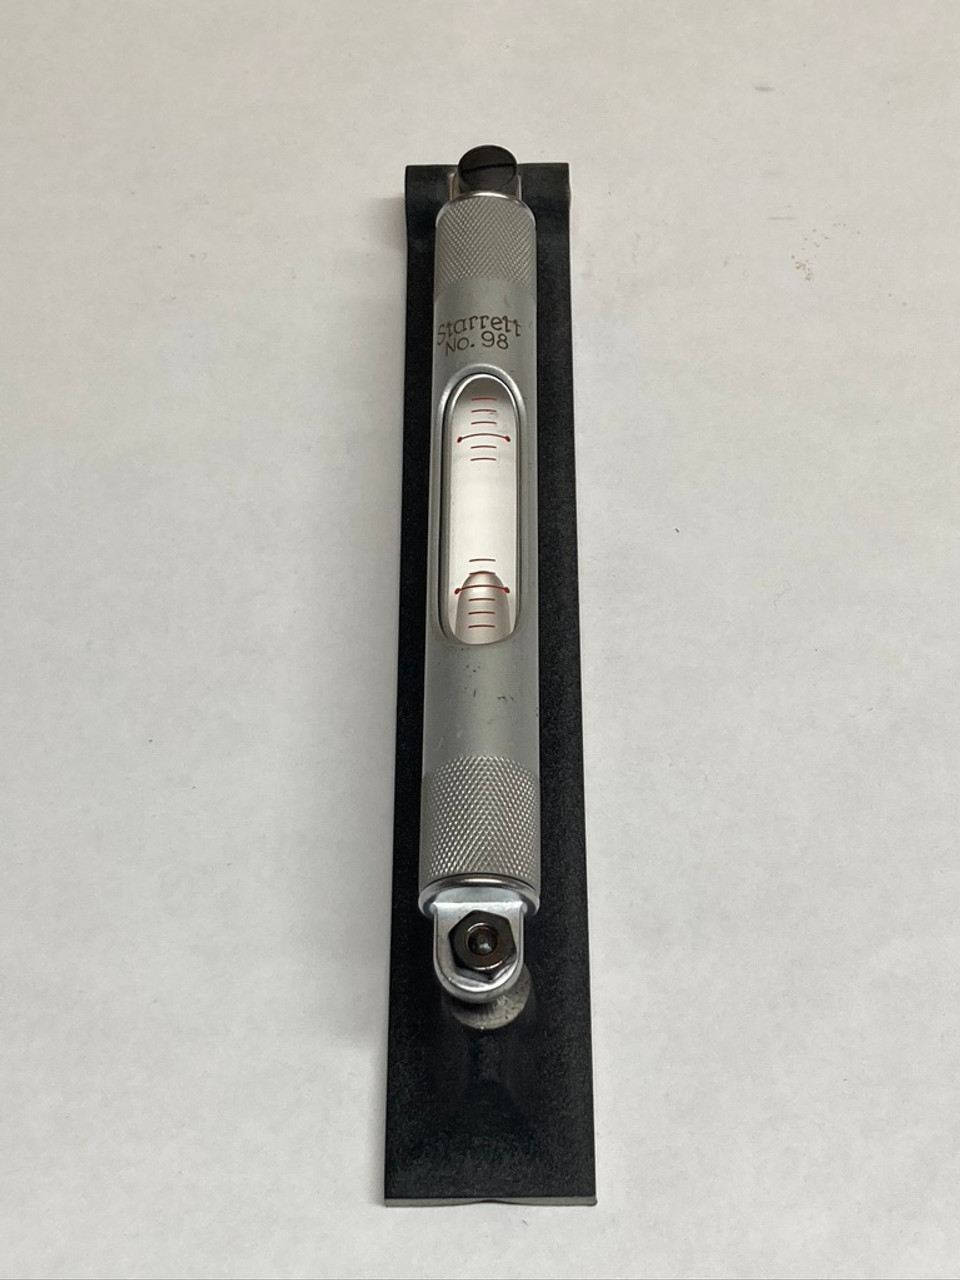 Starrett No. 98 Machinists Level with Ground and Graduated Vial